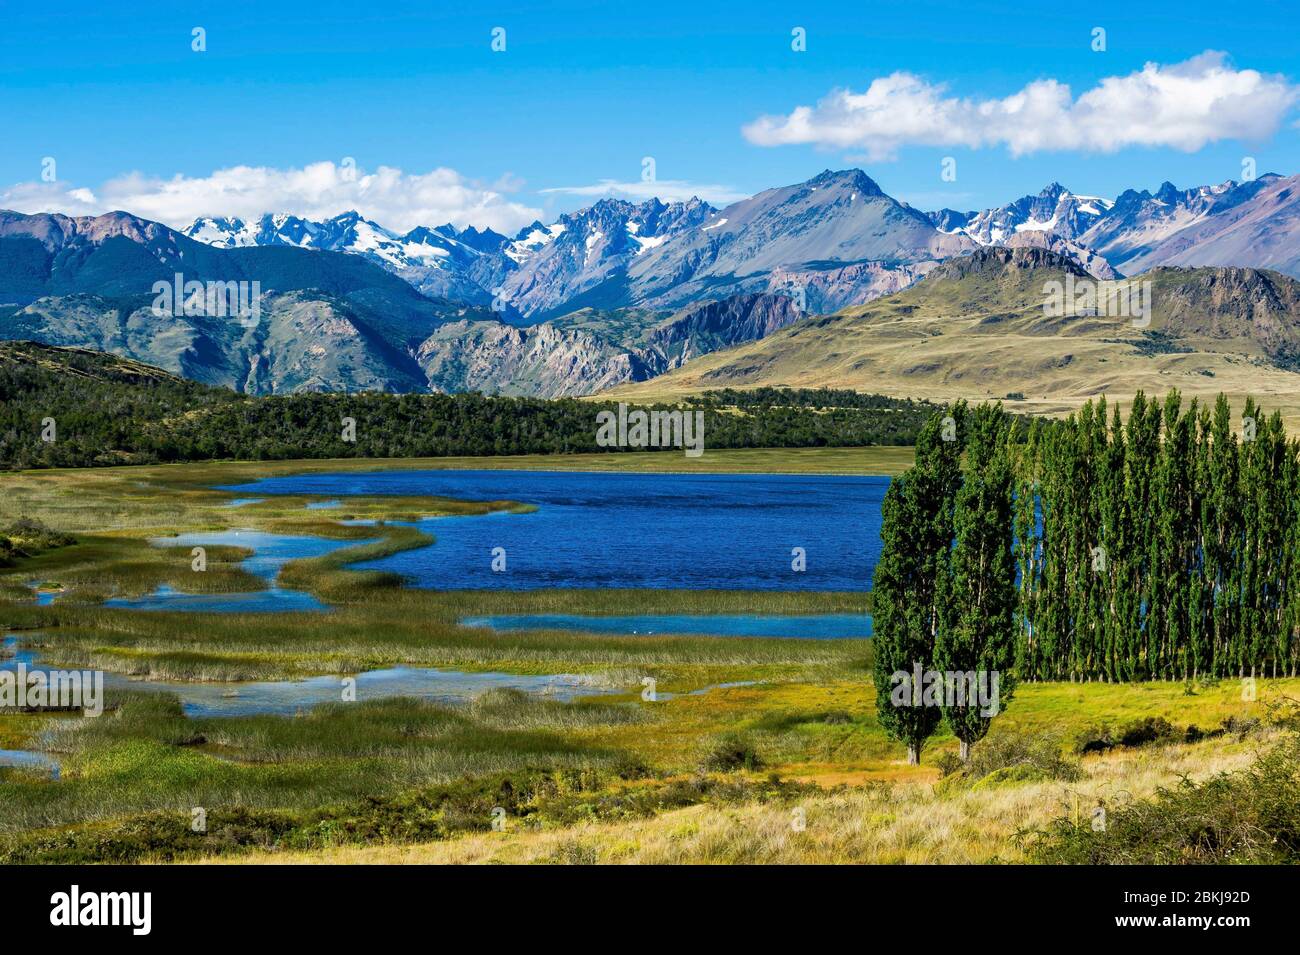 Chile, Patagonia, Aysen, Coyhaique, the Chacabuco Valley, in the new Patagonia National Park which has just been created on the border with Argentina Stock Photo